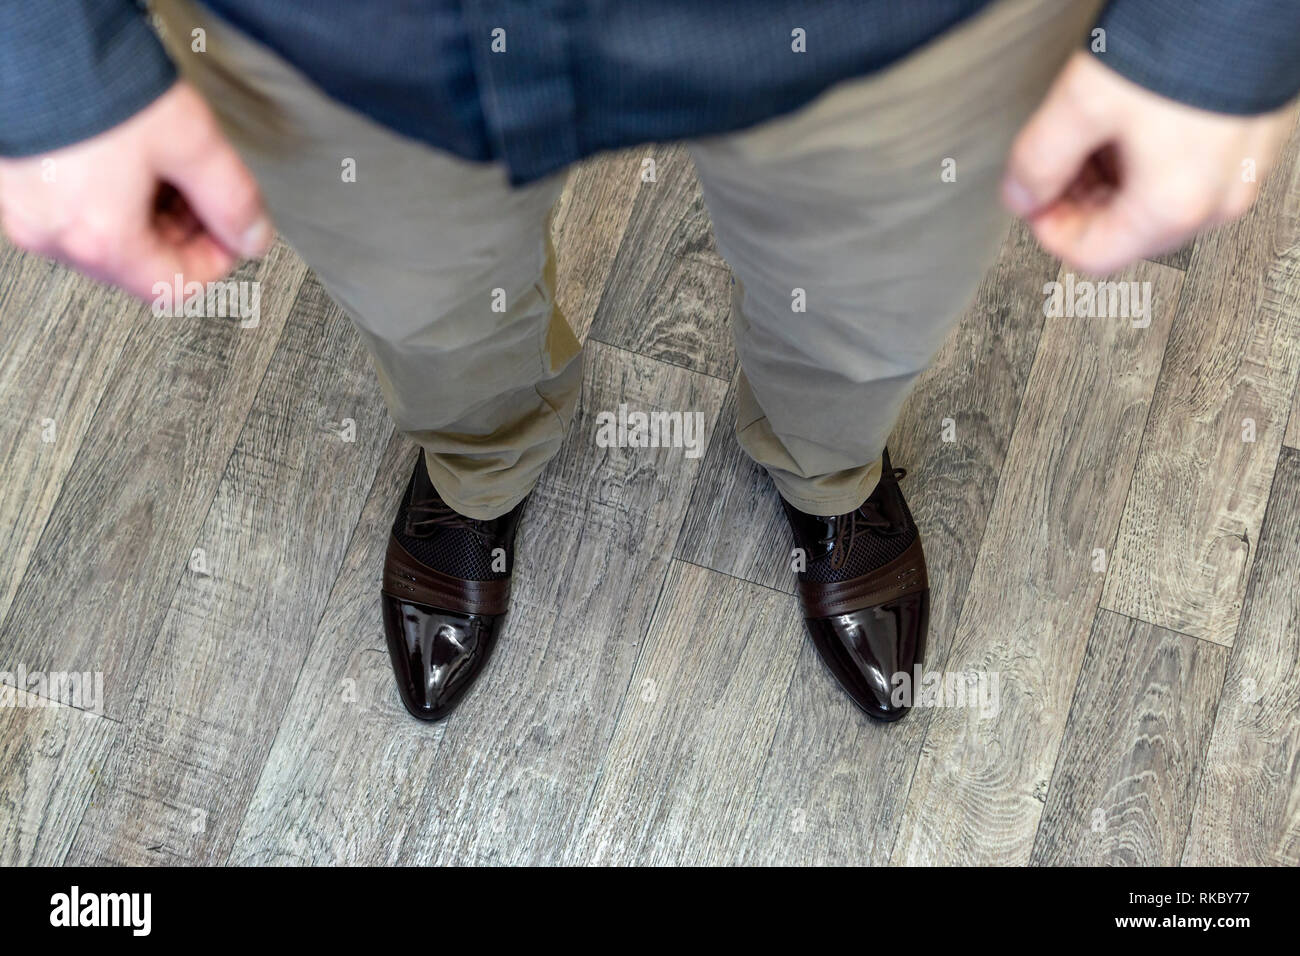 Legs of man in trousers and patent leather shoes Stock Photo